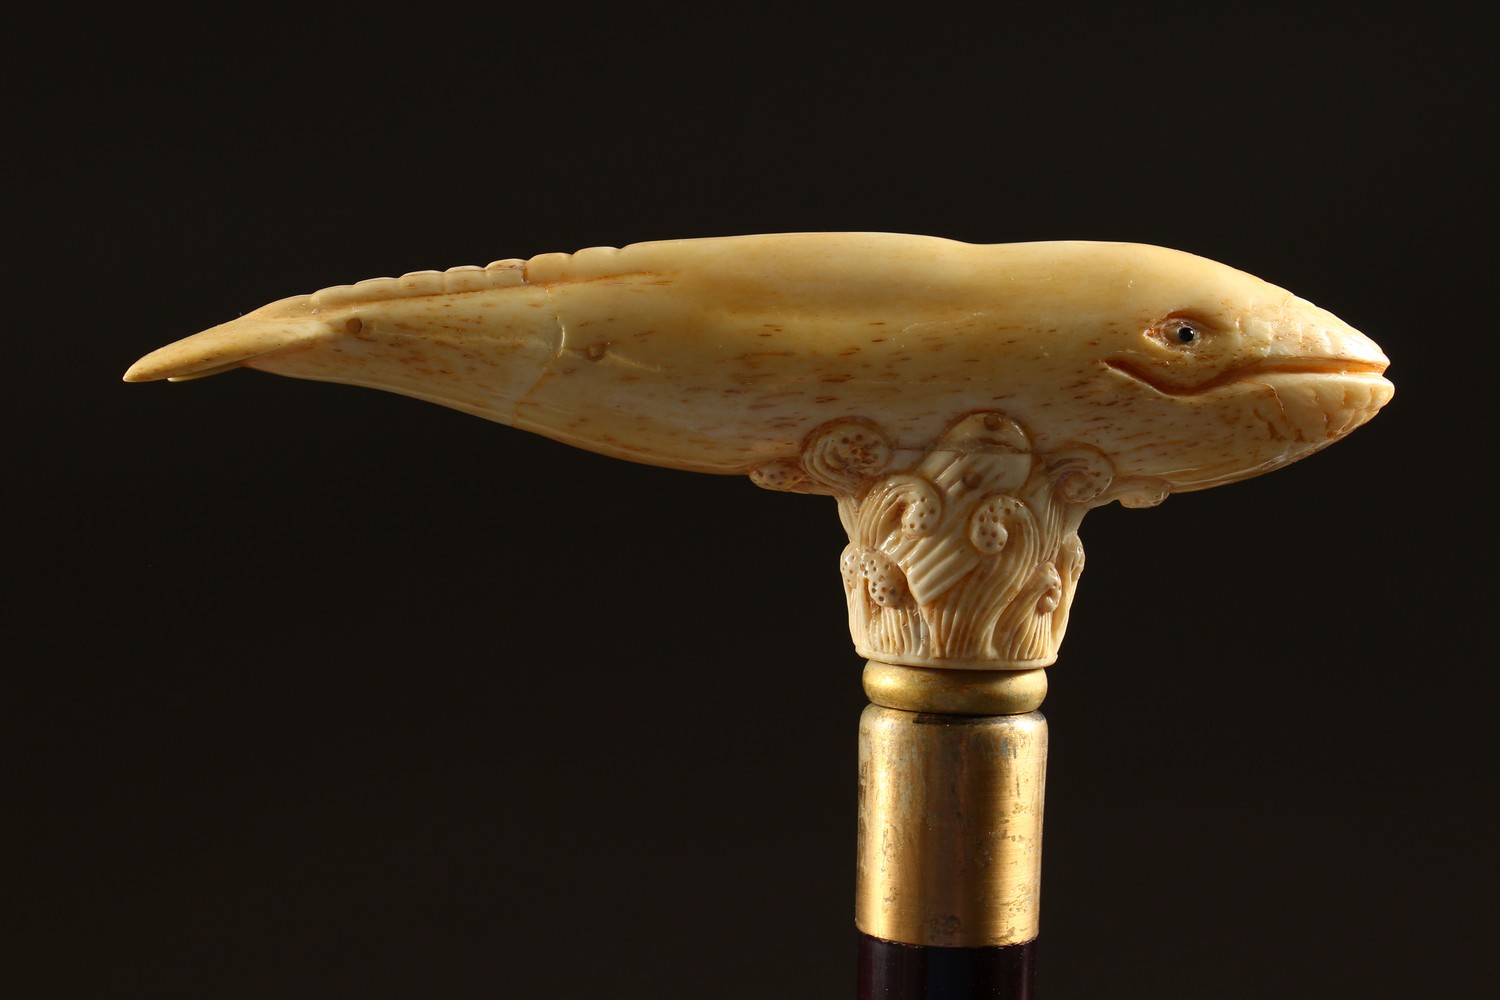 A BONE HANDLE WALKING STICK, carved as a whale. 36ins long. - Image 3 of 4